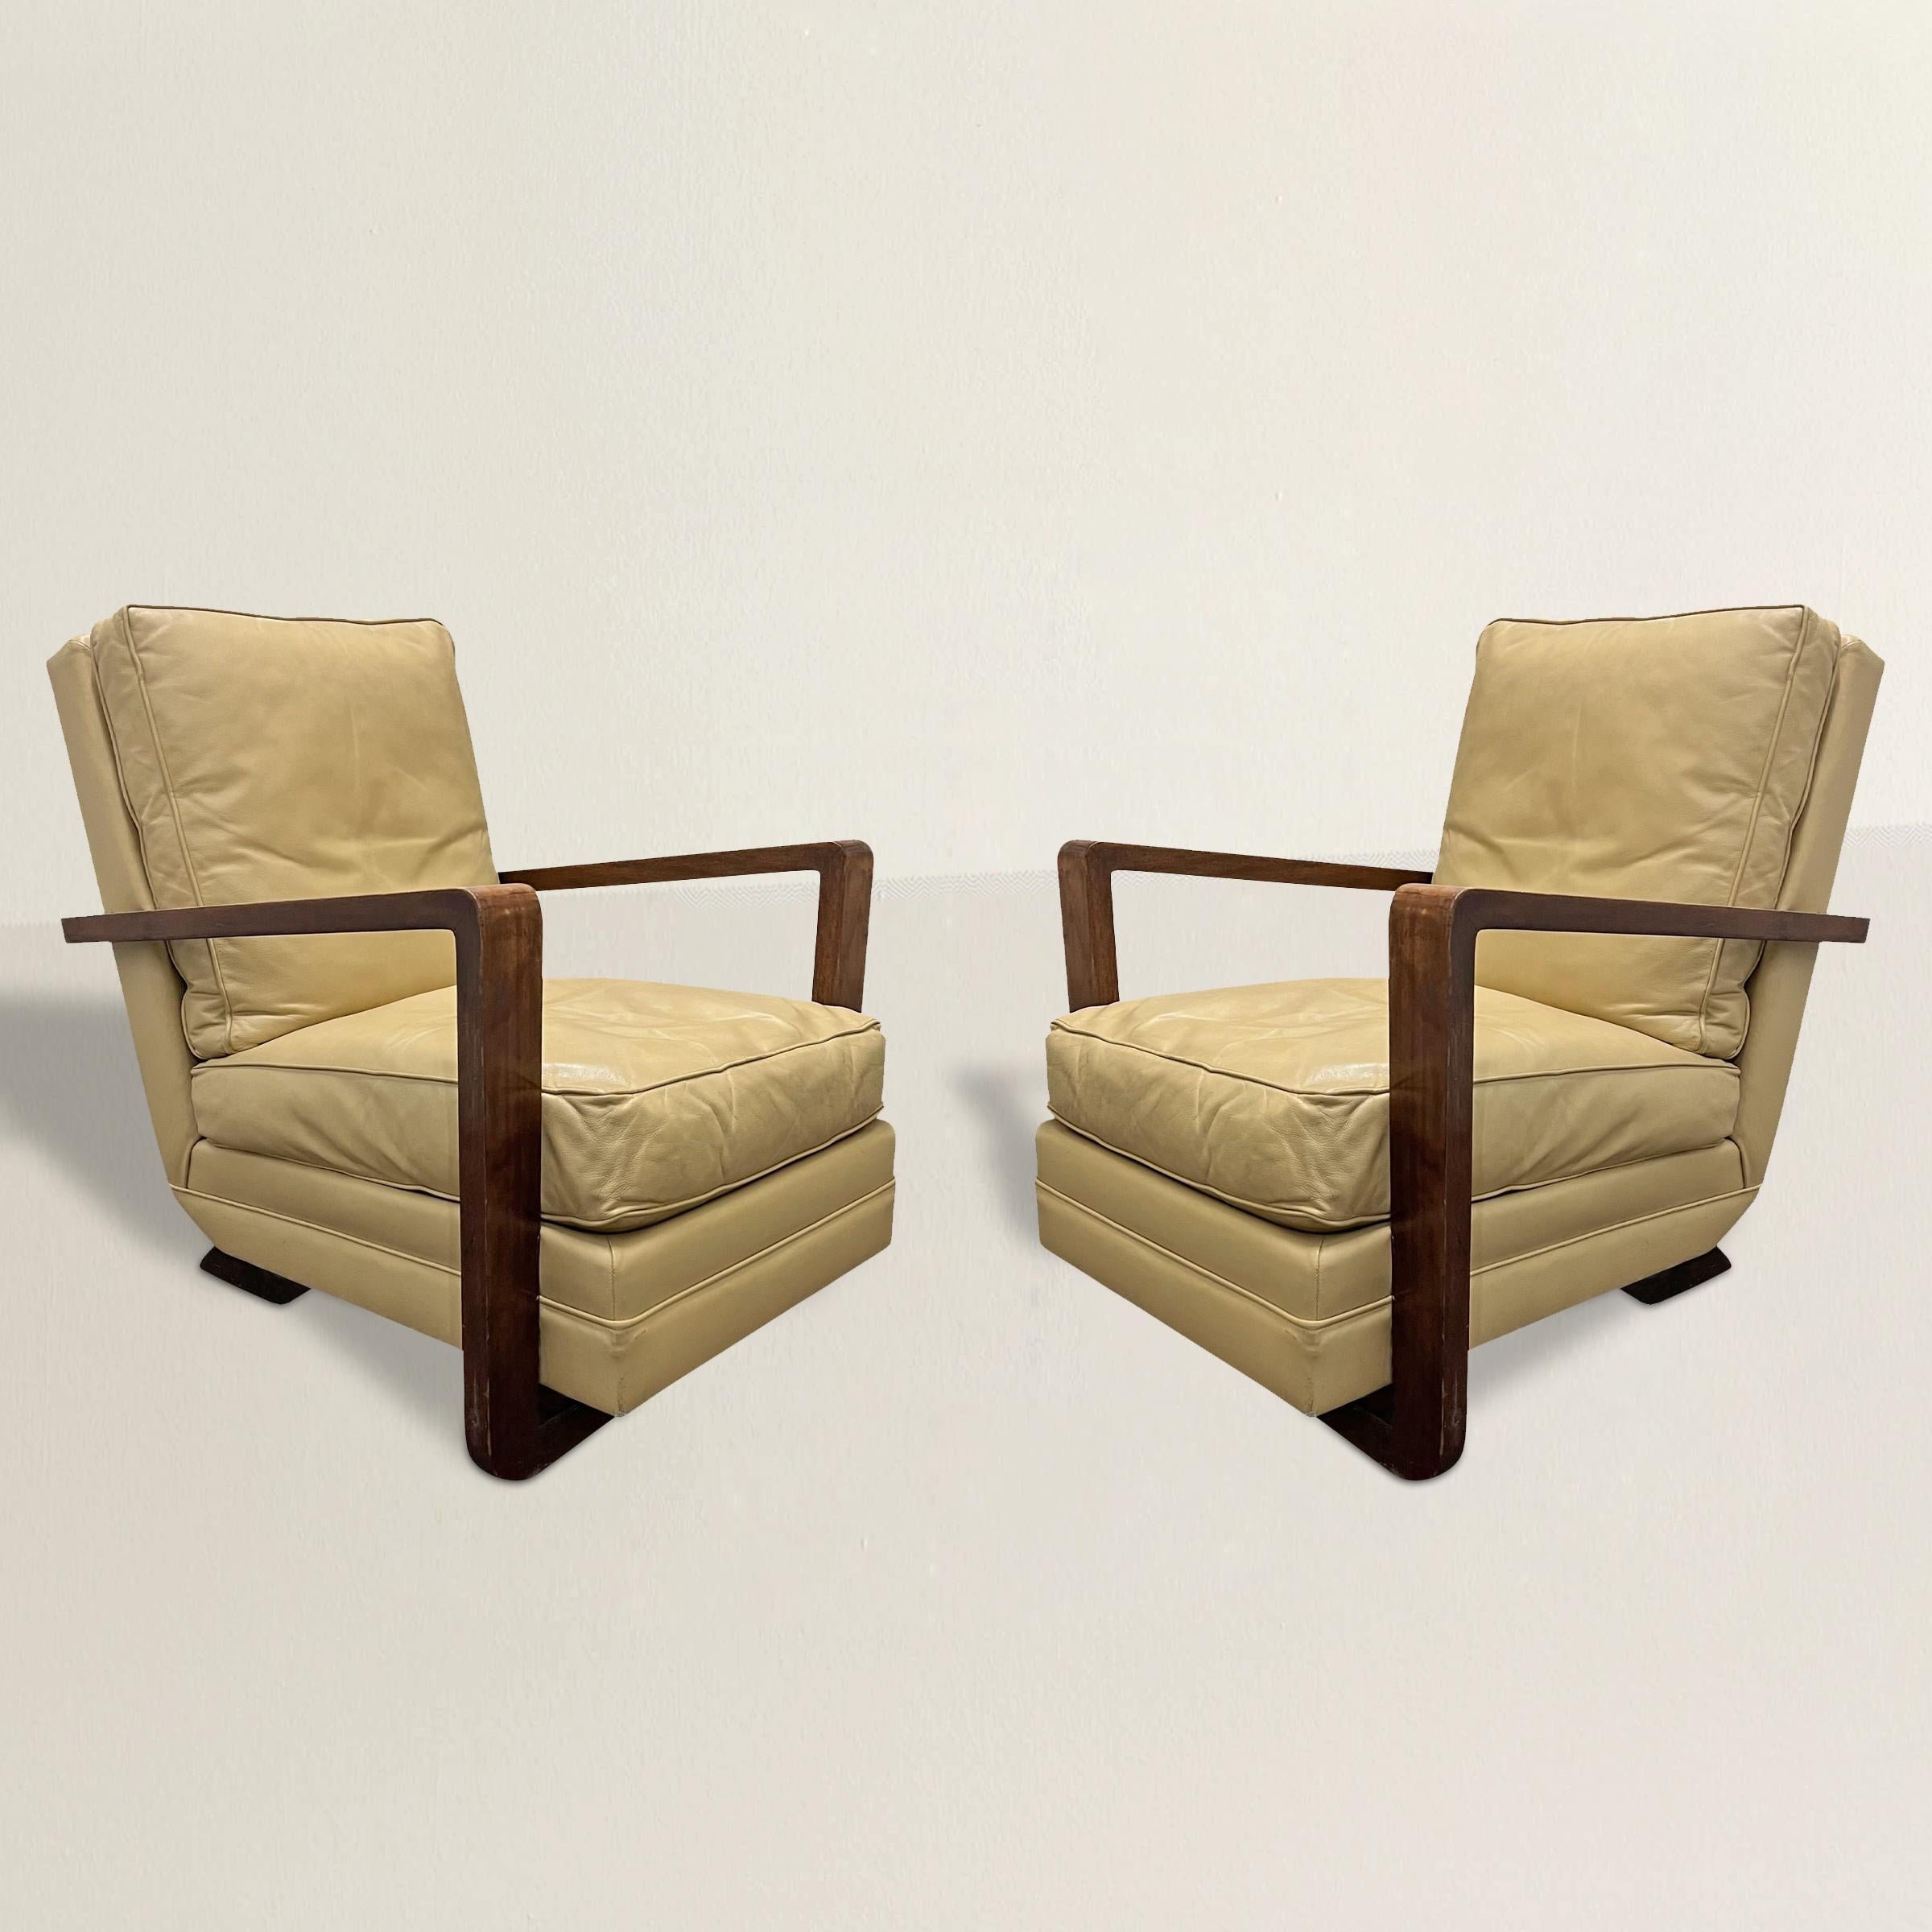 Step into the glamorous world of French Art Deco with this exquisite pair of club chairs. Crafted with simple continuous wood frames, these chairs epitomize the essence of the Art Deco movement, characterized by a harmonious blend of simple